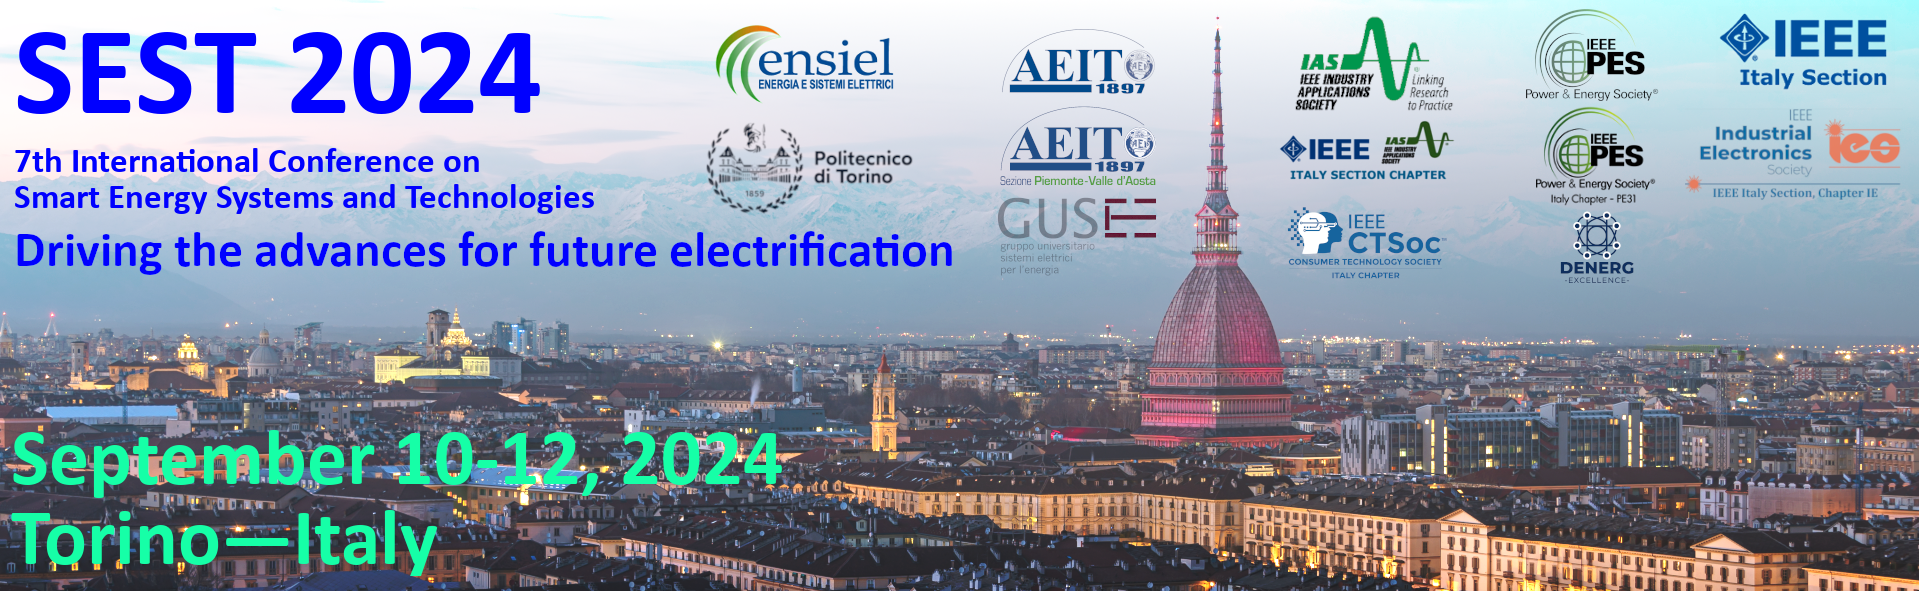 SEST 2024 – International Conference on Smart Energy Systems and Technologies 2024